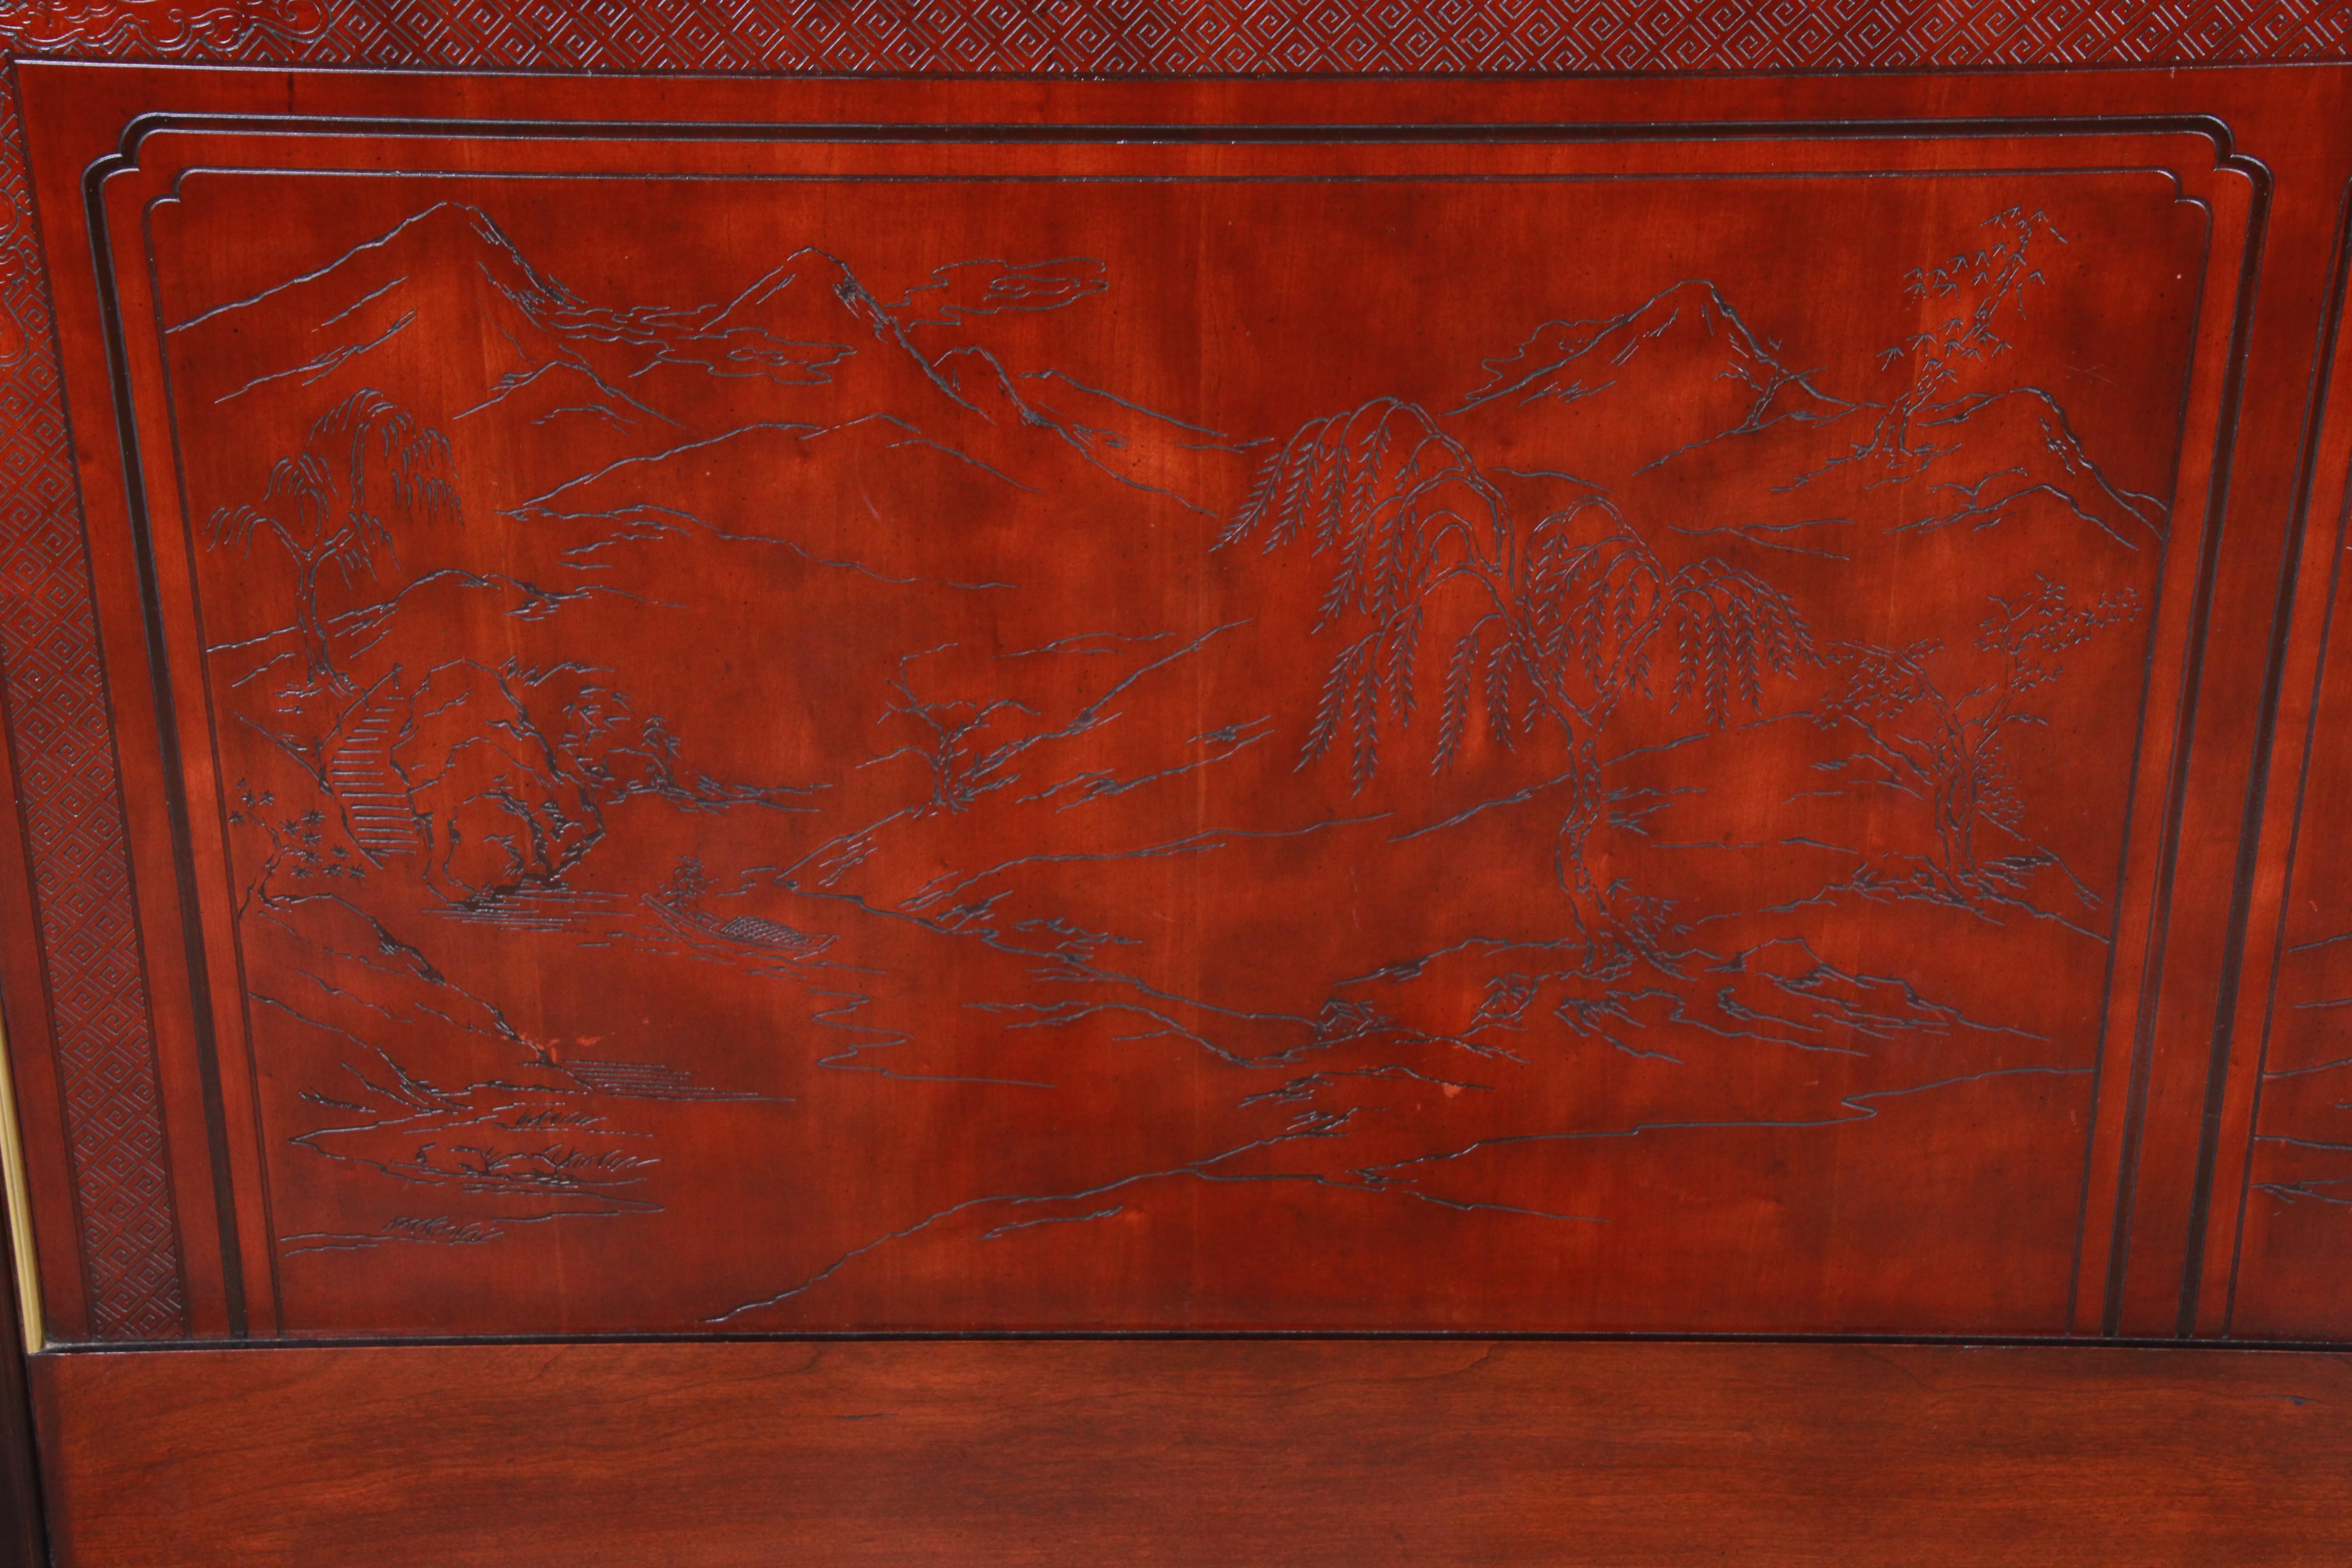 A gorgeous Hollywood Regency Chinoiserie queen size headboard from the Conoisseur line by Drexel Heritage. The headboard features beautiful mahogany wood grain with brass trim and unique carved Asian details with nature scenes. The original Drexel